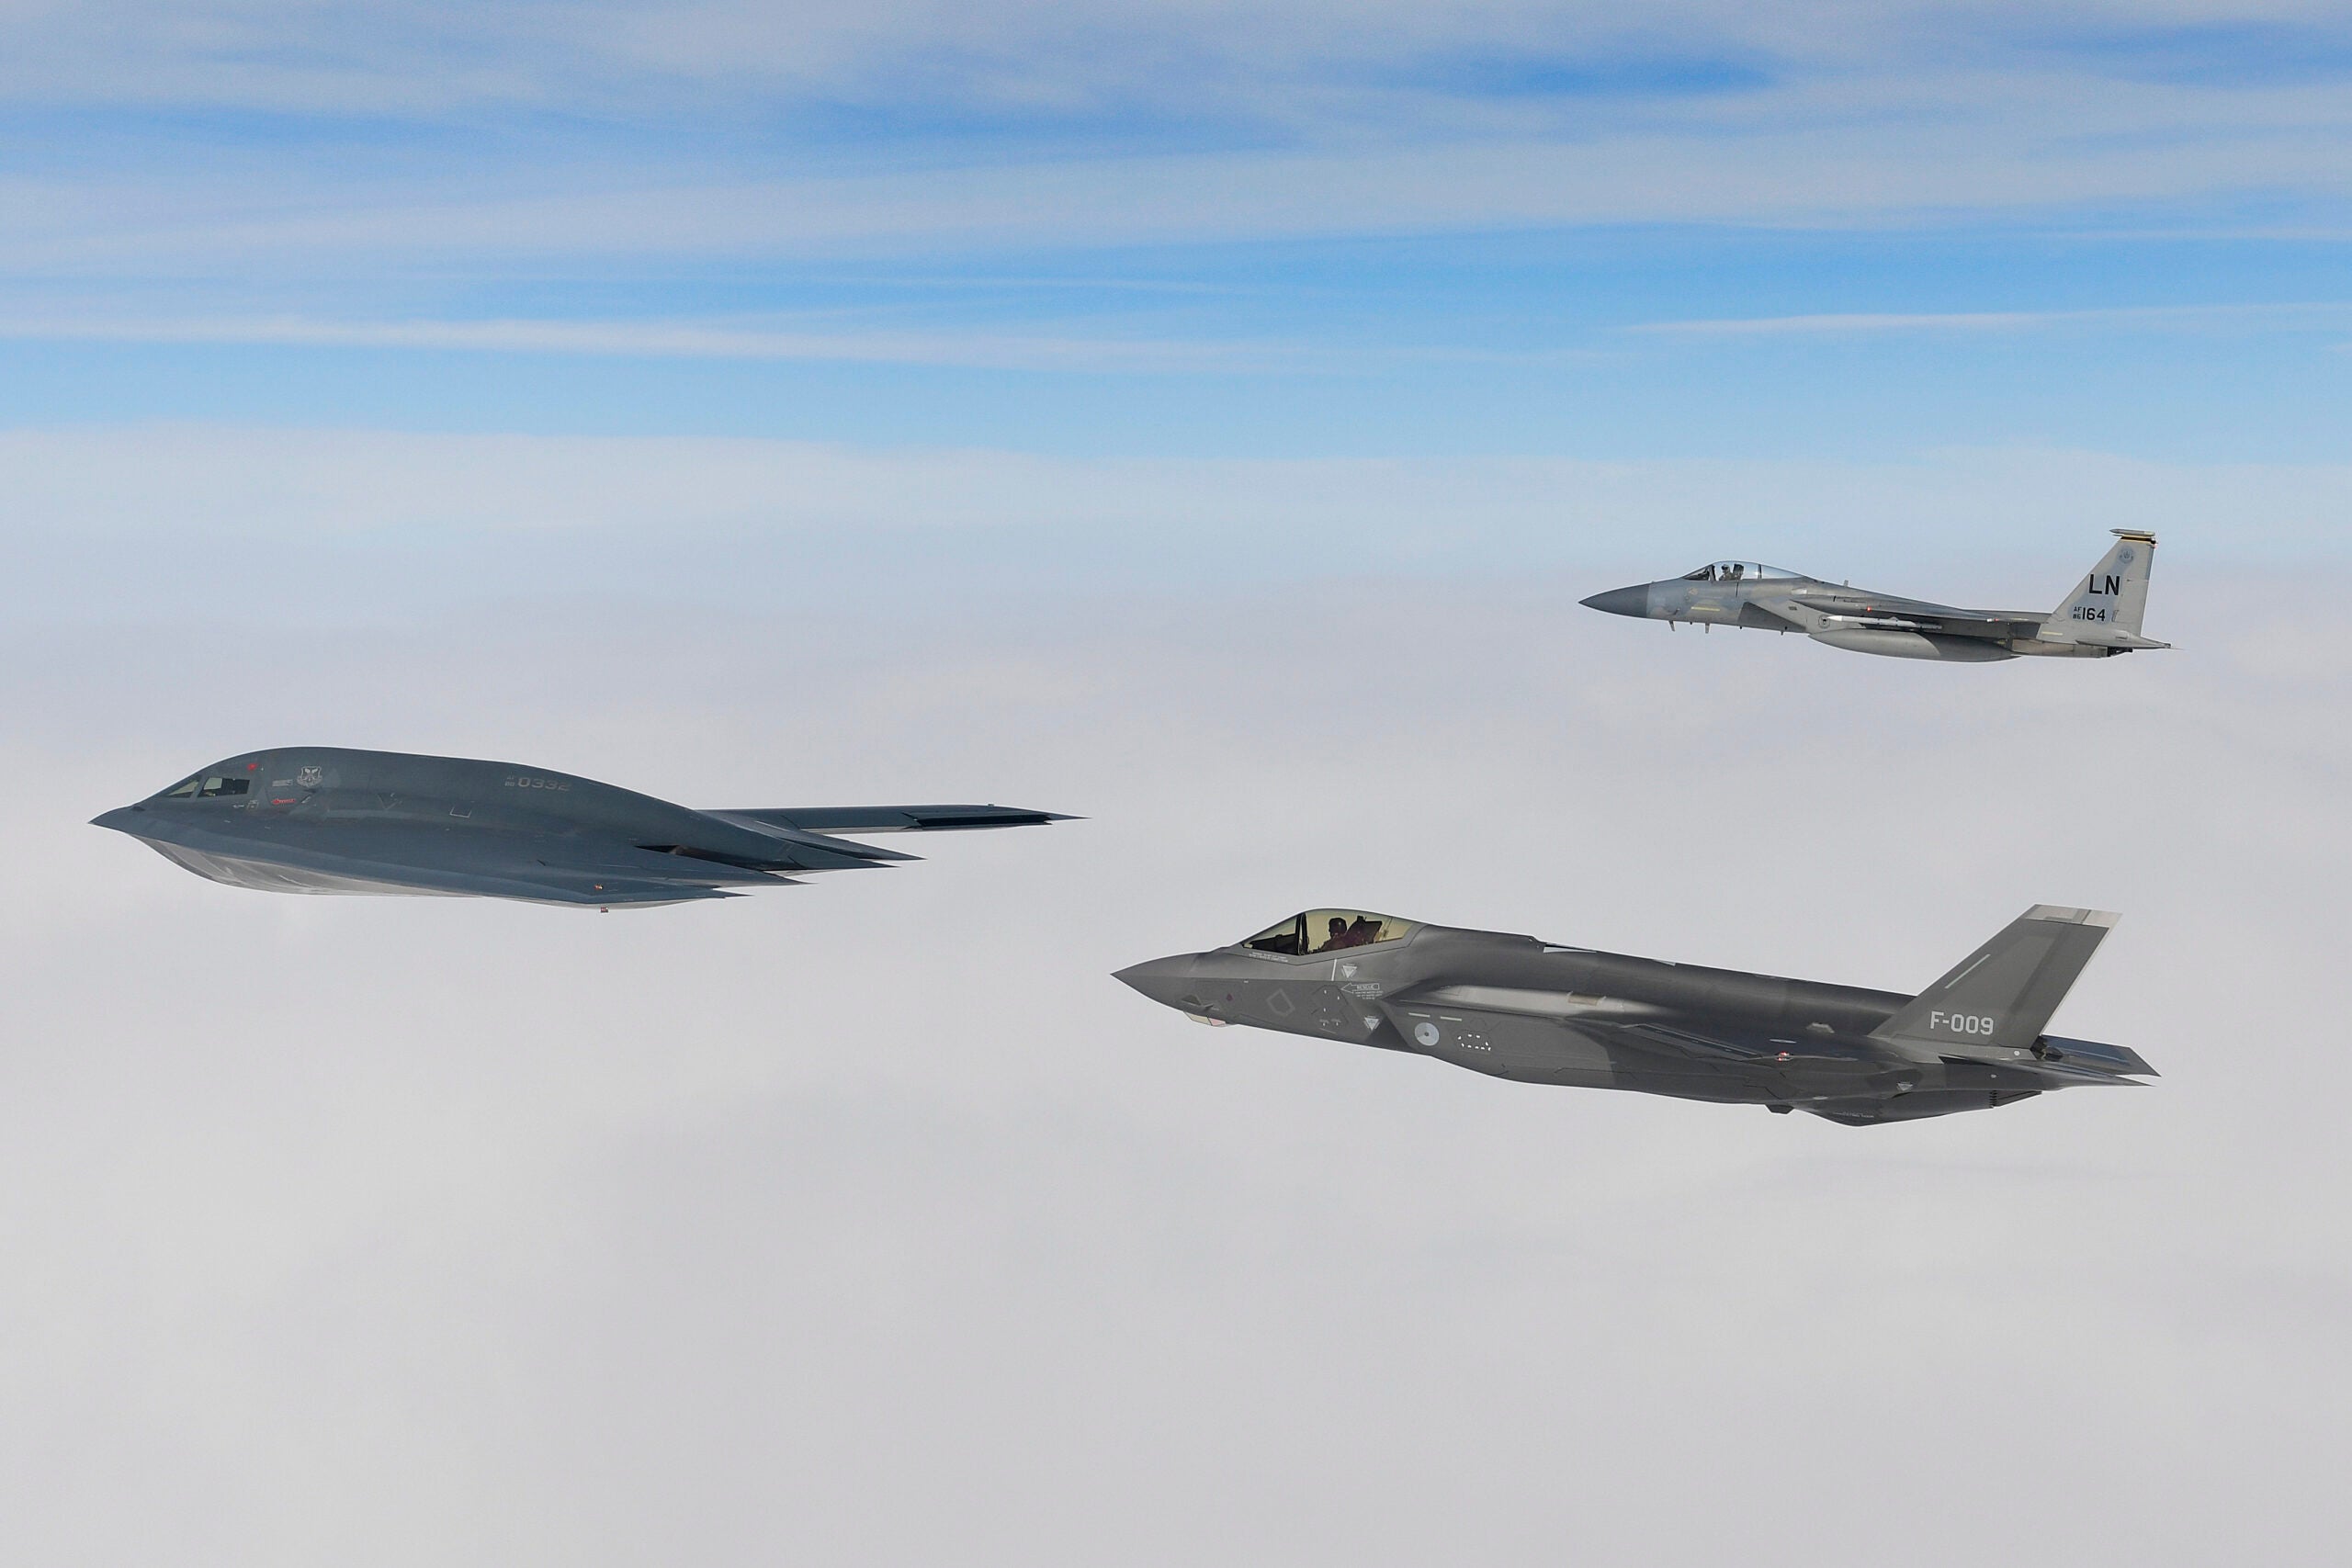 A B-2A Spirit bomber assigned to the 509th Bomb Wing, Royal Netherlands air force F-35A and U.S. F-15C Eagle assigned to the 48th Fighter Wing conduct aerial operations in support of Bomber Task Force Europe 20-2 over the North Sea March 18, 2020. Bomber missions provide opportunities to train and work with NATO allies and theater partners in combined and joint operations and exercises. (U.S. Air Force photo/ Master Sgt. Matthew Plew)